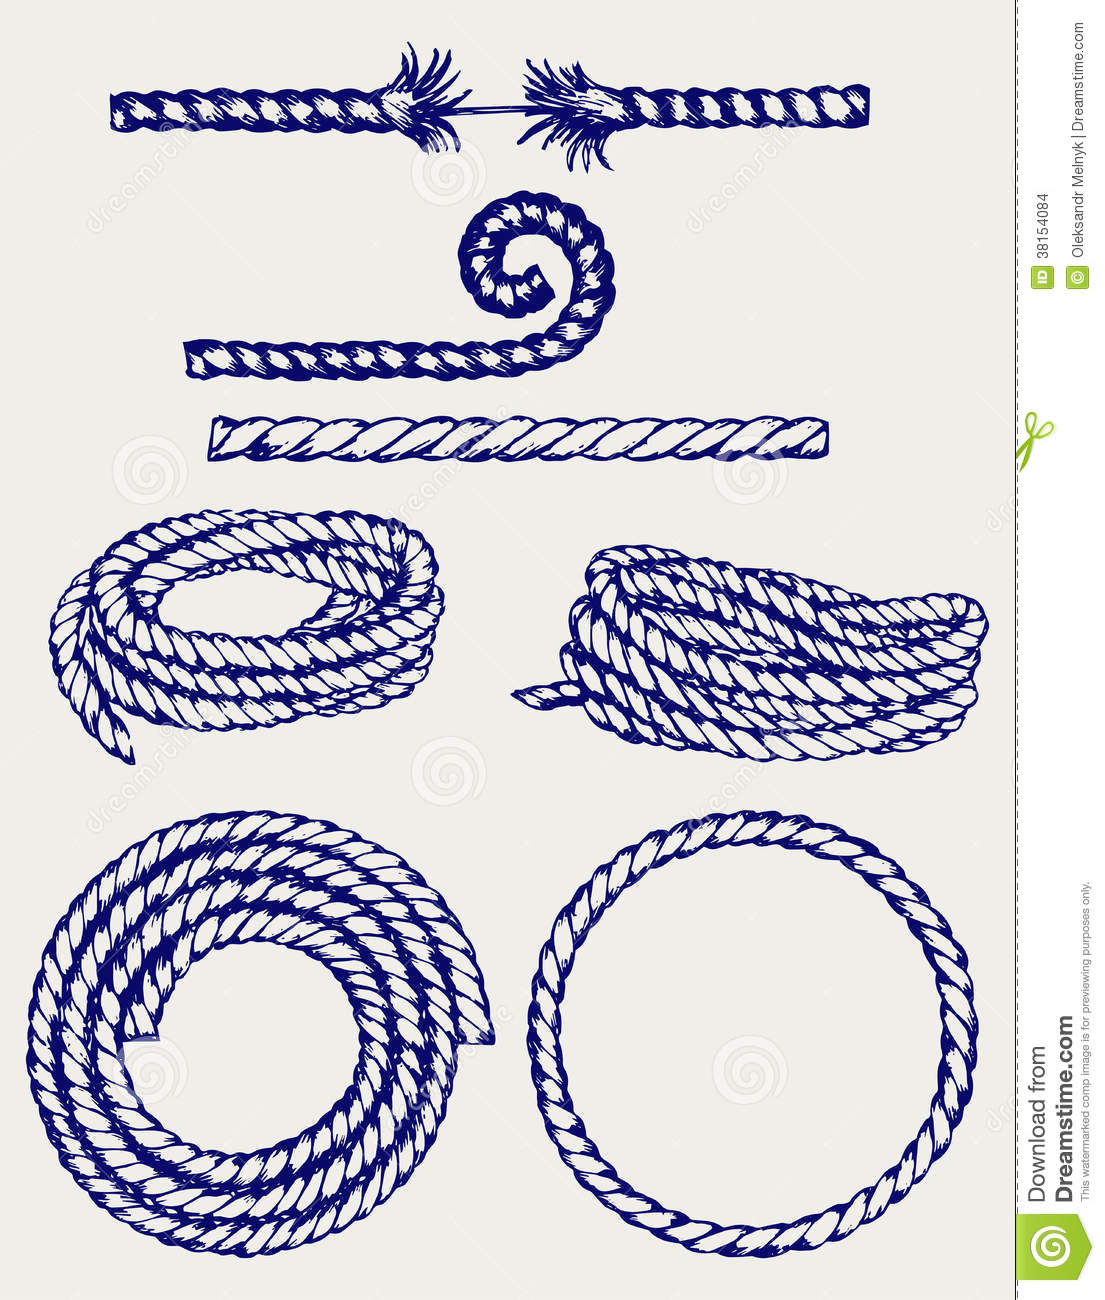 Nautical Knot Clipart